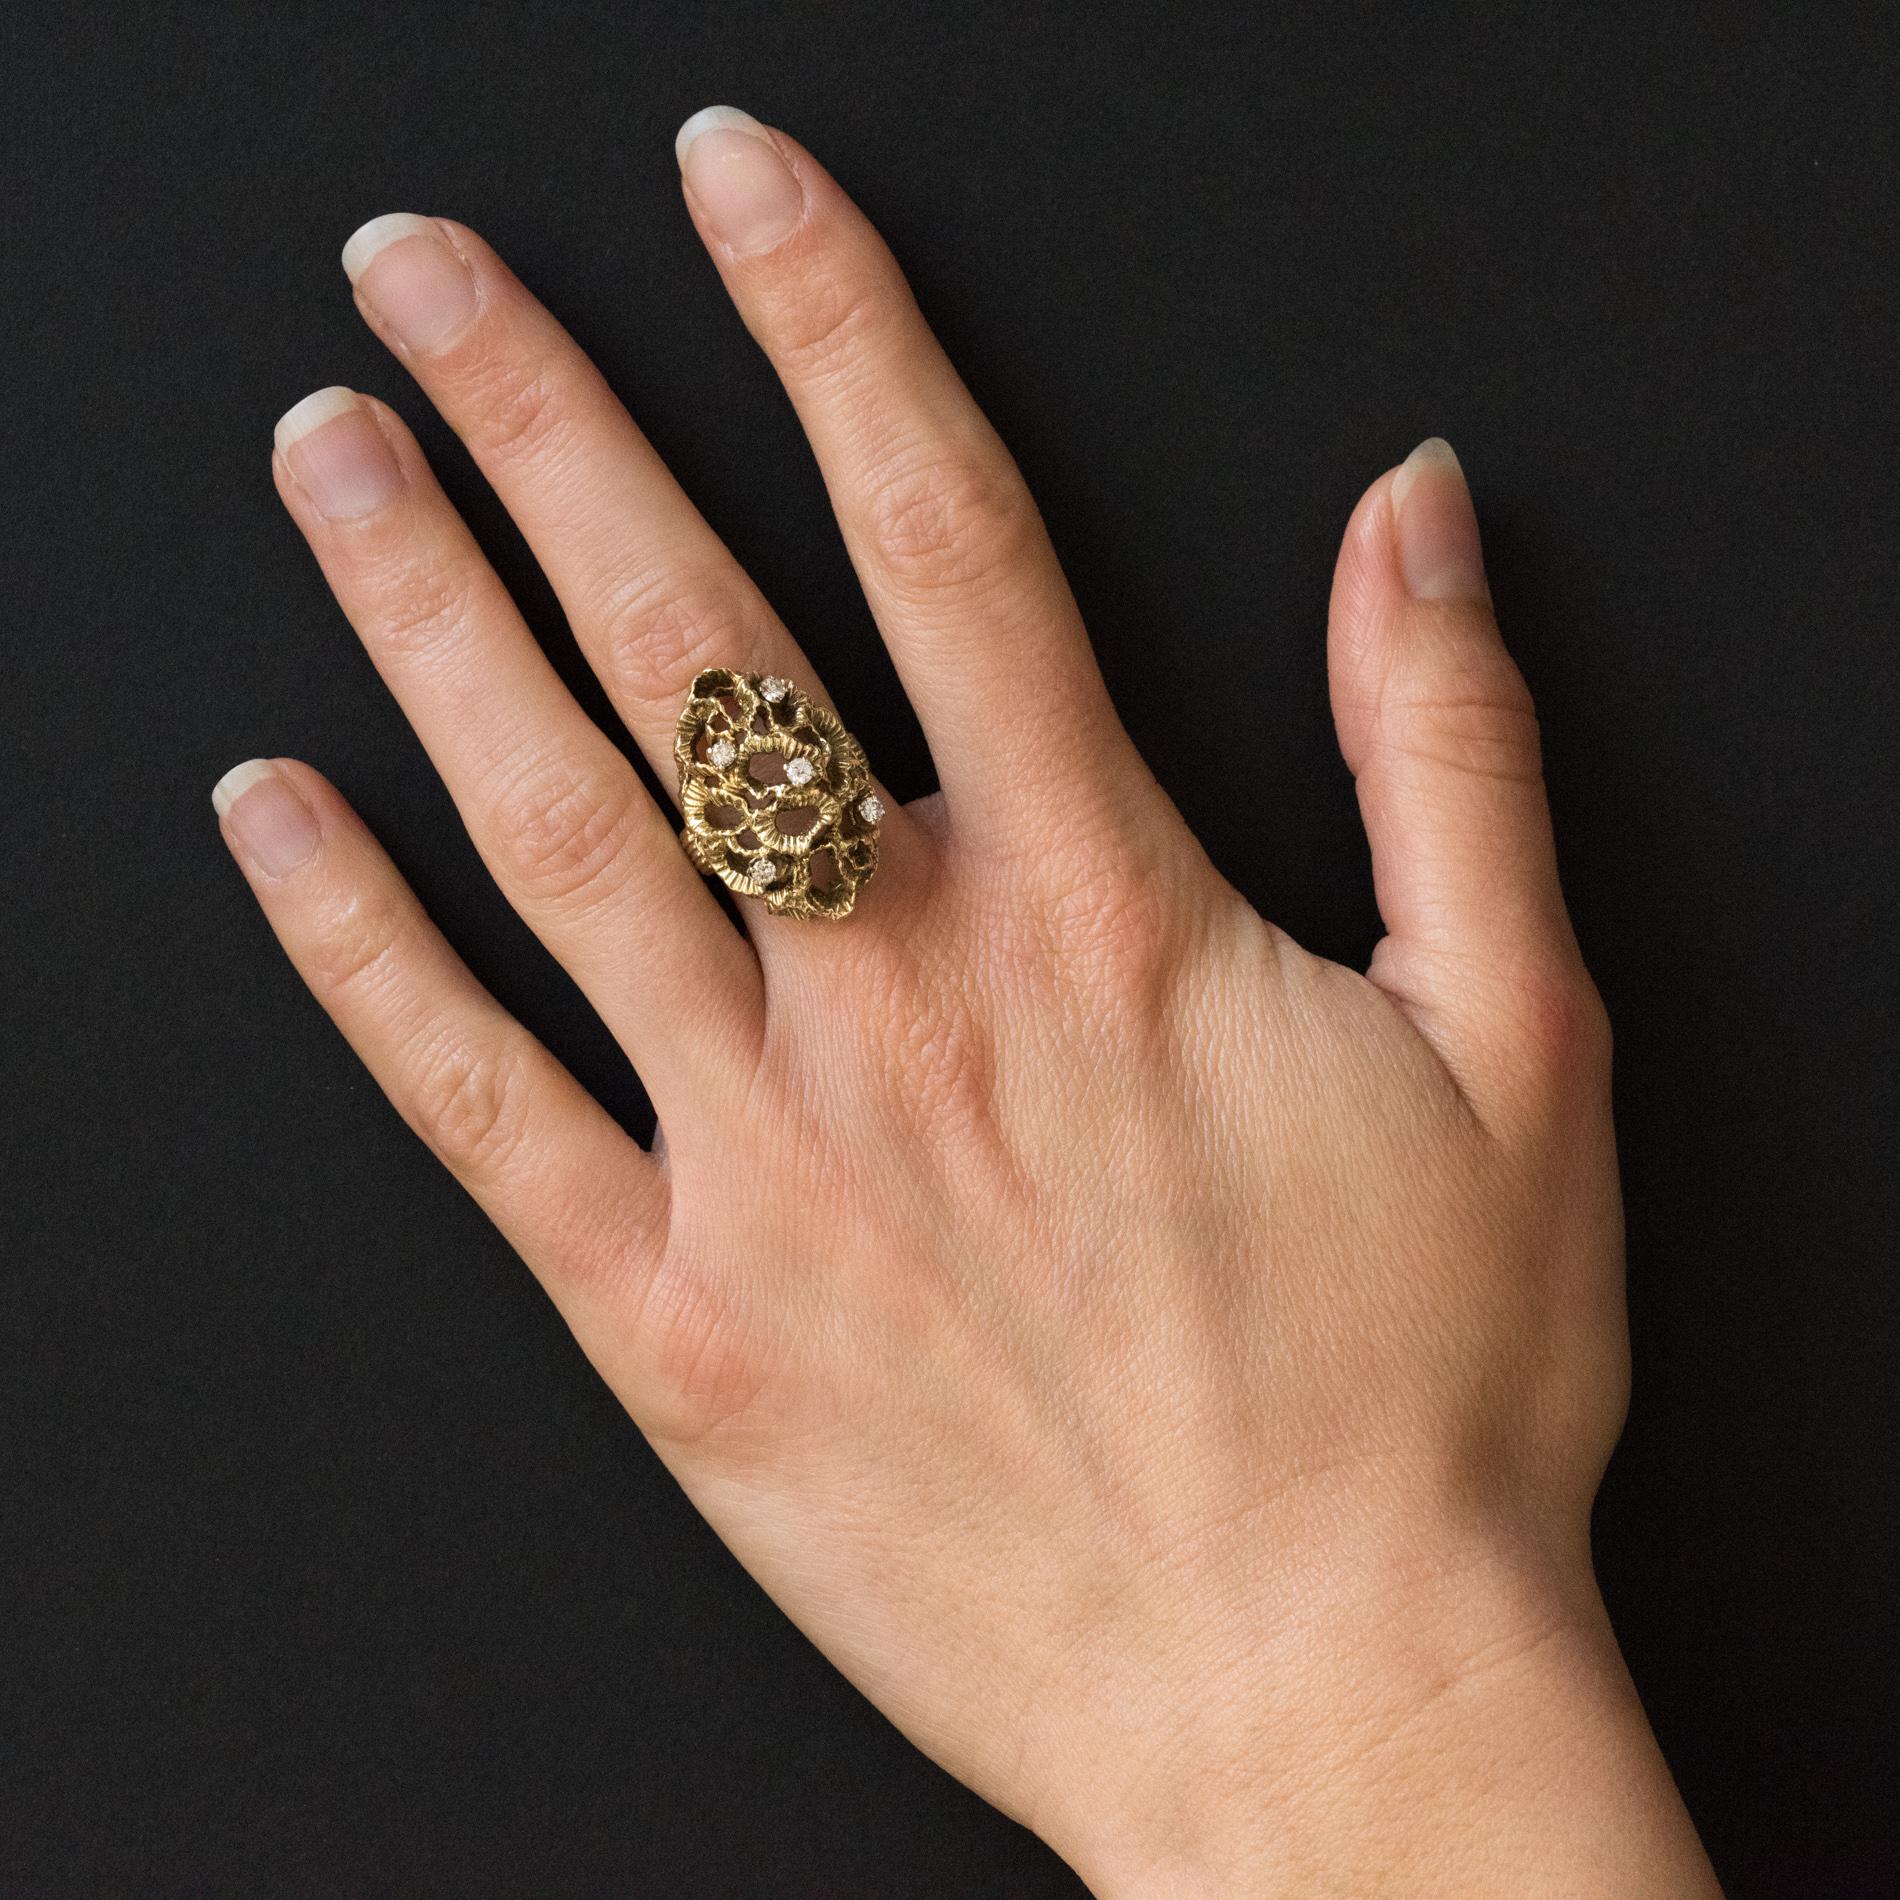 Ring in 14 karats yellow gold.
This voluminous ring with modernist lines is set with claws of 5 brilliant-cut diamonds in a domed, openwork and chiseled decoration like a drapery.
Diamond weight: 0.22 carat approximately.
Height: 2.6 cm, width: 1.5